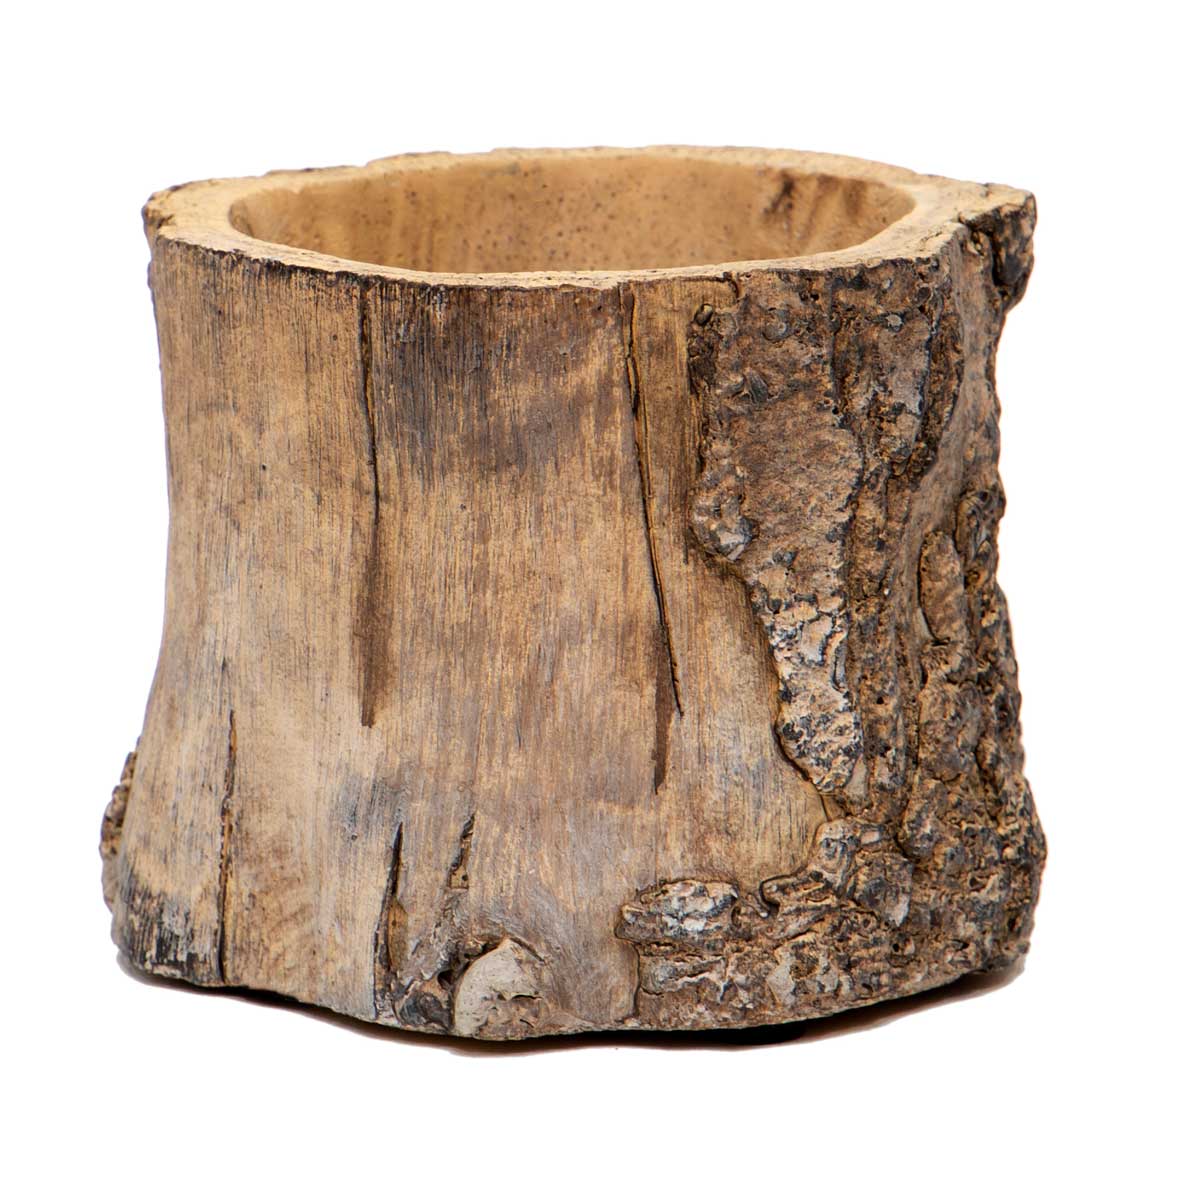 CONCRETE LOG POT BROWN WITH BARK TEXTURE SMALL